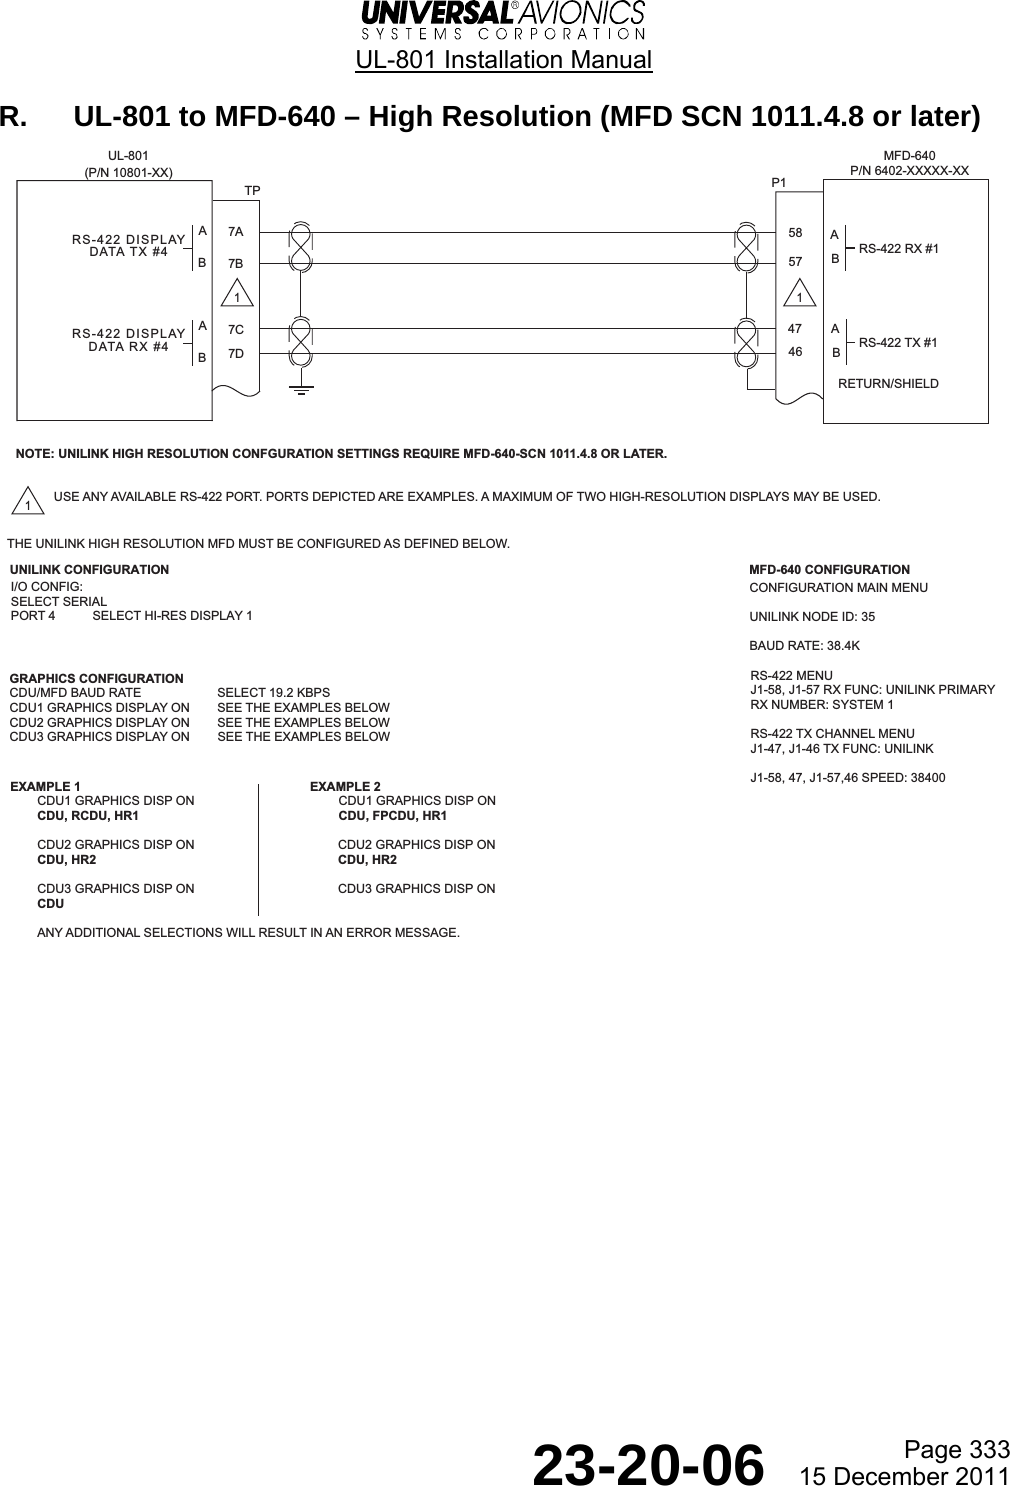  UL-801 Installation Manual  Page 333  23-20-06  15 December 2011 R.  UL-801 to MFD-640 – High Resolution (MFD SCN 1011.4.8 or later)     MFD-640P/N 6402-XXXXX-XXUL-801(P/N 10801-XX)TP P1RETURN/SHIELDBABA1RS-422 TX #1RS-422 RX #17A7D7C7B1USE ANY AVAILABLE RS-422 PORT. PORTS DEPICTED ARE EXAMPLES. A MAXIMUM OF TWO HIGH-RESOLUTION DISPLAYS MAY BE USED.SELECT SERIALPORT 4 SELECT HI-RES DISPLAY 1I/O CONFIG:UNILINK CONFIGURATIONRS-422 MENUJ1-58, J1-57 RX FUNC: UNILINK PRIMARYRX NUMBER: SYSTEM 1RS-422 TX CHANNEL MENUJ1-47, J1-46 TX FUNC: UNILINKJ1-58, 47, J1-57,46 SPEED: 38400MFD-640 CONFIGURATIONCONFIGURATION MAIN MENUUNILINK NODE ID: 35BAUD RATE: 38.4KGRAPHICS CONFIGURATIONCDU/MFD BAUD RATE SELECT 19.2 KBPSCDU1 GRAPHICS DISPLAY ON SEE THE EXAMPLES BELOWCDU2 GRAPHICS DISPLAY ON SEE THE EXAMPLES BELOWCDU3 GRAPHICS DISPLAY ON        SEE THE EXAMPLES BELOW1NOTE: UNILINK HIGH RESOLUTION CONFGURATION SETTINGS REQUIRE MFD-640-SCN 1011.4.8 OR LATER.THE UNILINK HIGH RESOLUTION MFD MUST BE CONFIGURED AS DEFINED BELOW.EXAMPLE 1 EXAMPLE 2CDU1 GRAPHICS DISP ON CDU1 GRAPHICS DISP ONCDU, RCDU, HR1 CDU, FPCDU, HR1CDU2 GRAPHICS DISP ON CDU2 GRAPHICS DISP ONCDU, HR2 CDU, HR2CDU3 GRAPHICS DISP ON CDU3 GRAPHICS DISP ONCDUANY ADDITIONAL SELECTIONS WILL RESULT IN AN ERROR MESSAGE.ABRS-422 DISPLAYDATA TX #4ABRS-422 DISPLAYDATA RX #4 46584757